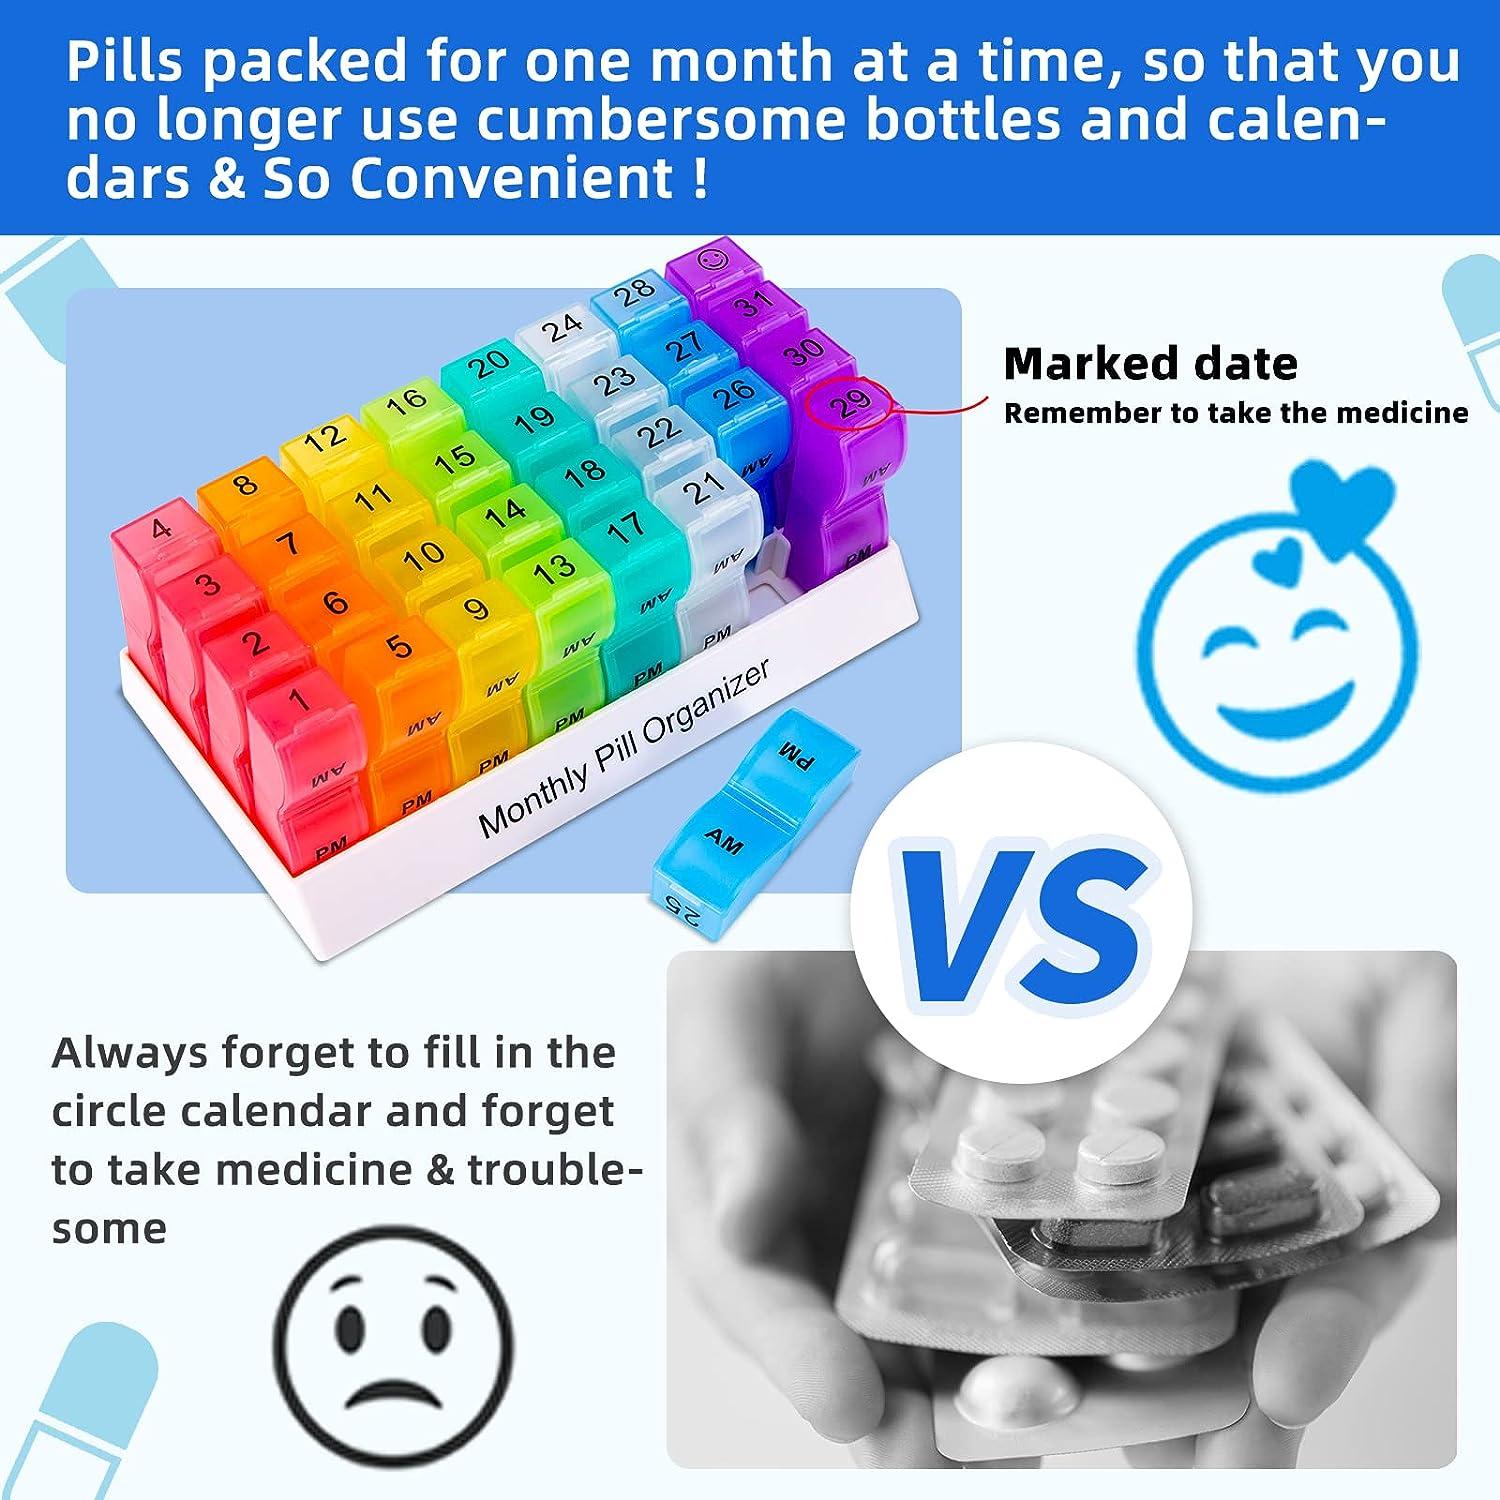 Monthly Pill Organizer 2 Times a Day,30 Day One Month Pill Box AM PM,31 Day  Pill Case Small Compartments to Hold Vitamins,Travel Medicine Organizer,31  Day Pill Organizer Twice a Day 1 Month